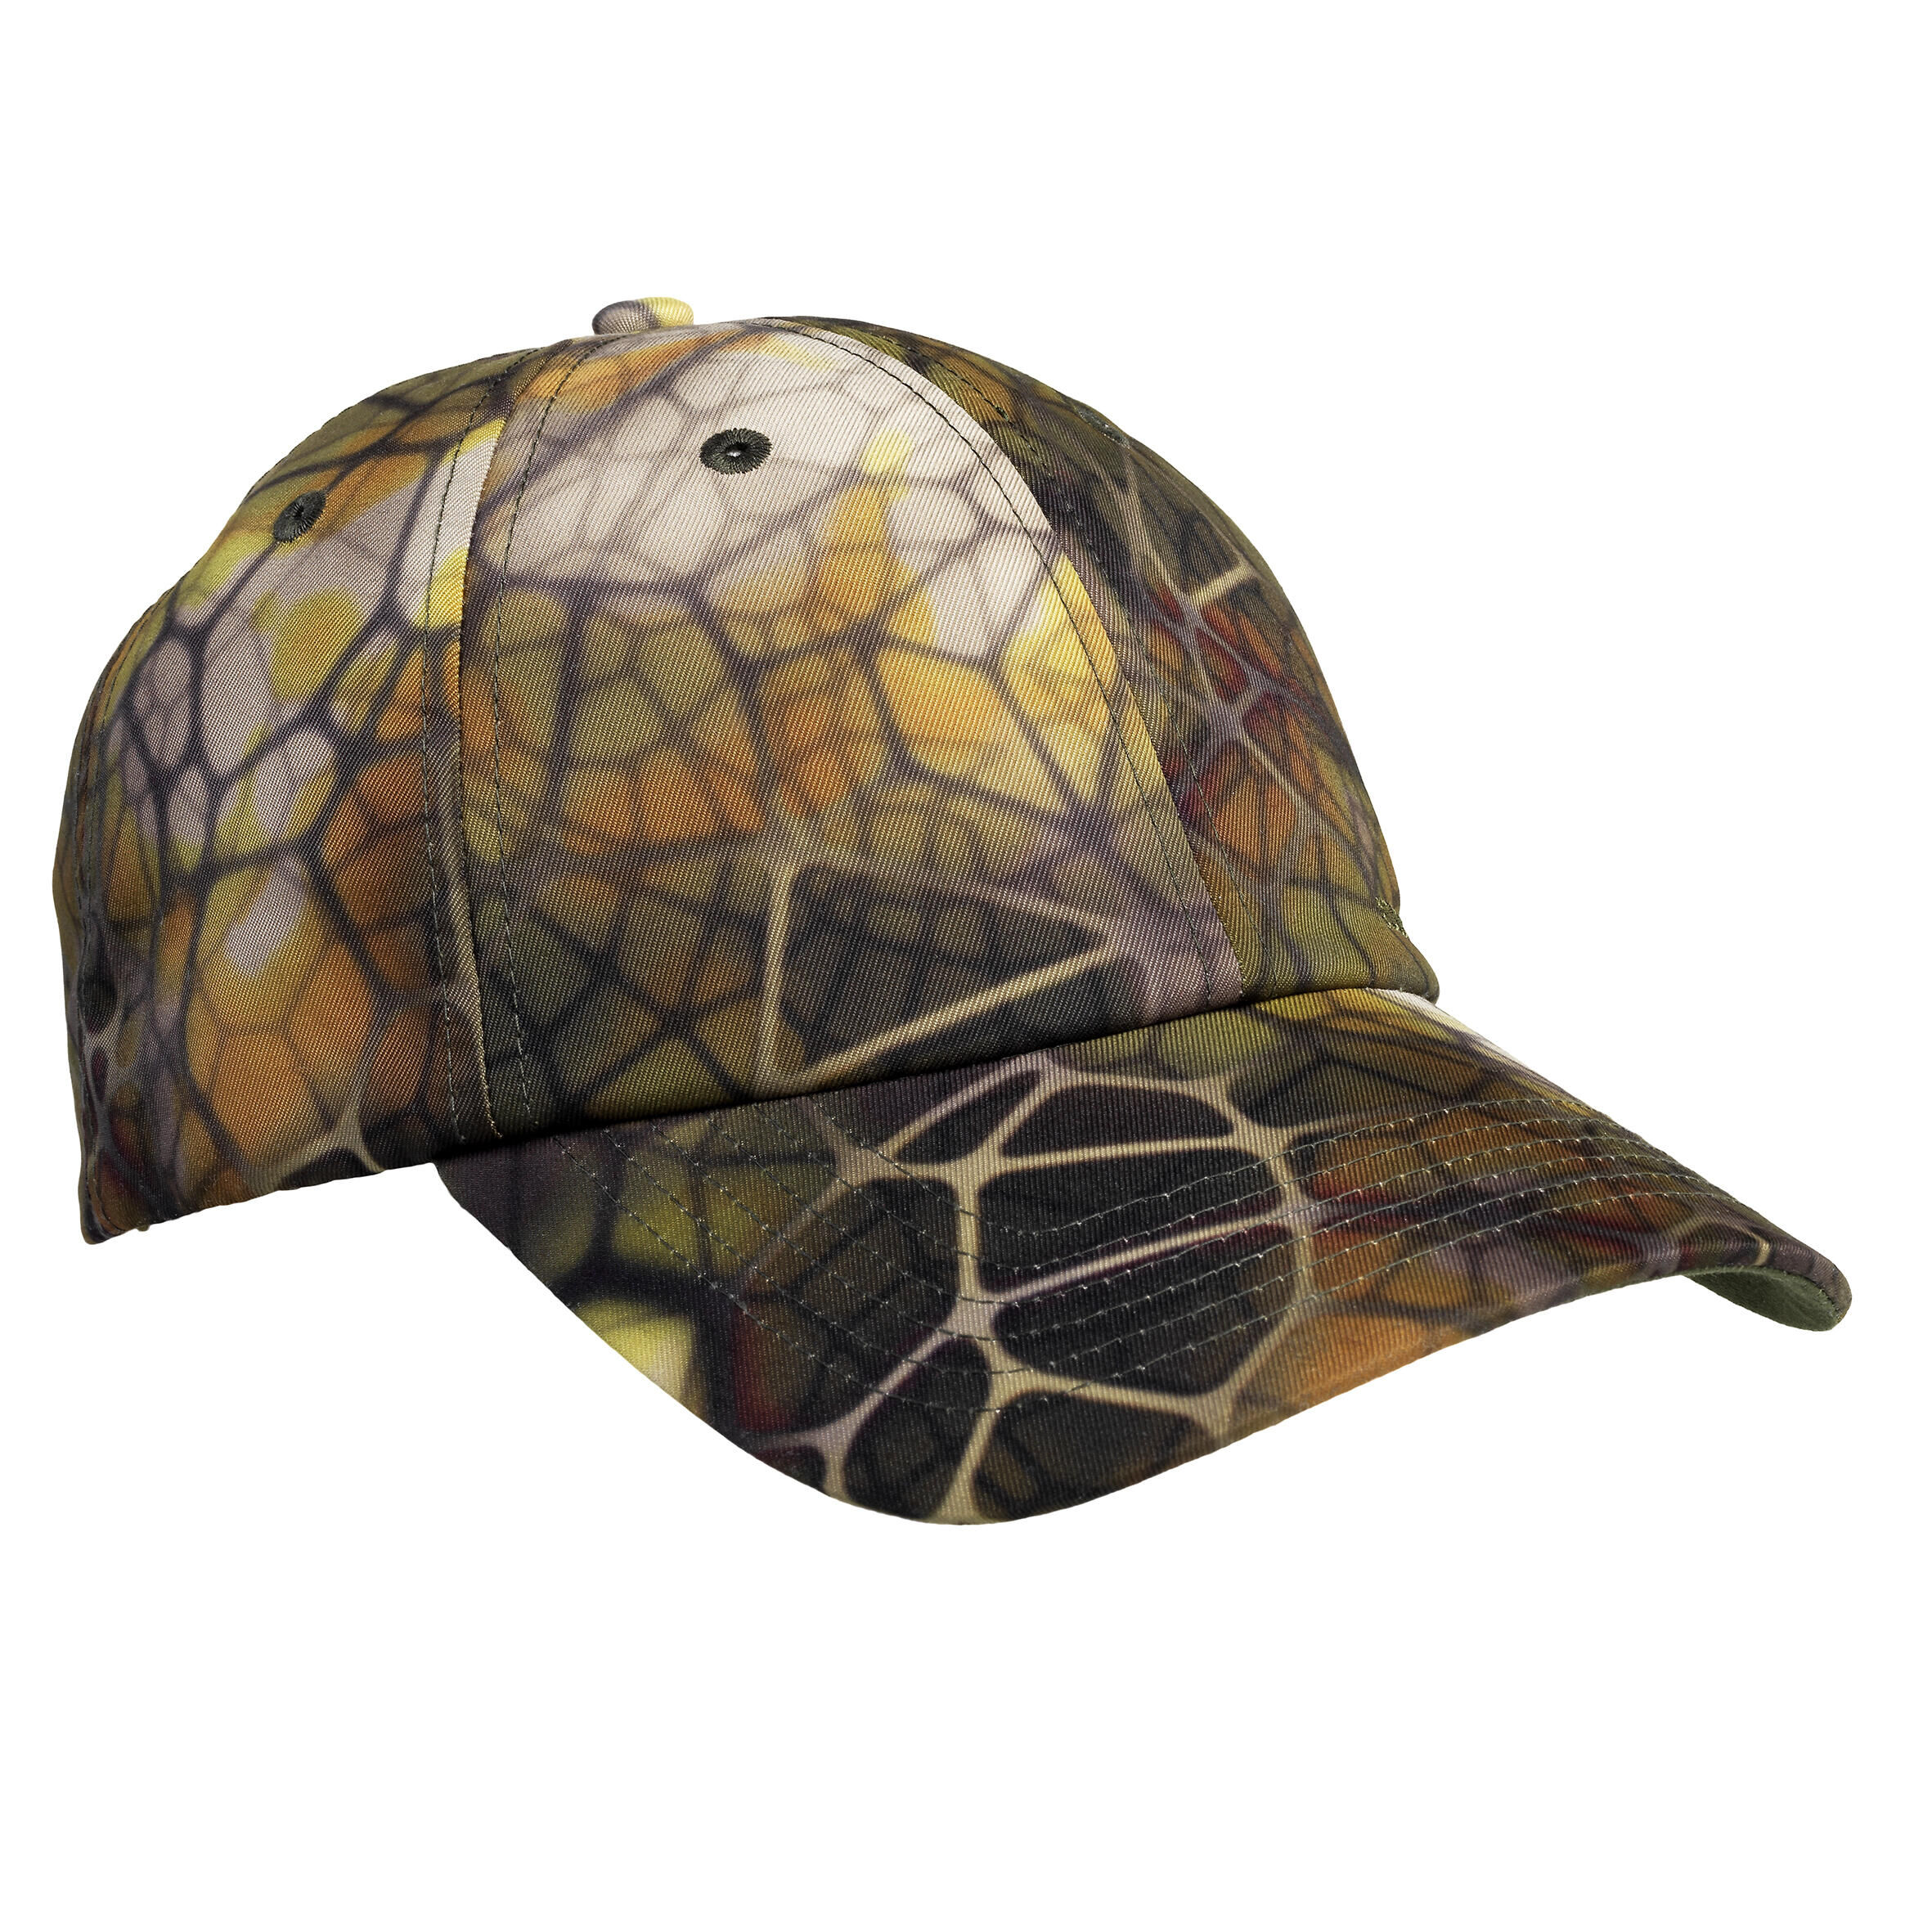 SOLOGNAC Breathable Country Sport Cap 100 - Furtiv Camouflage